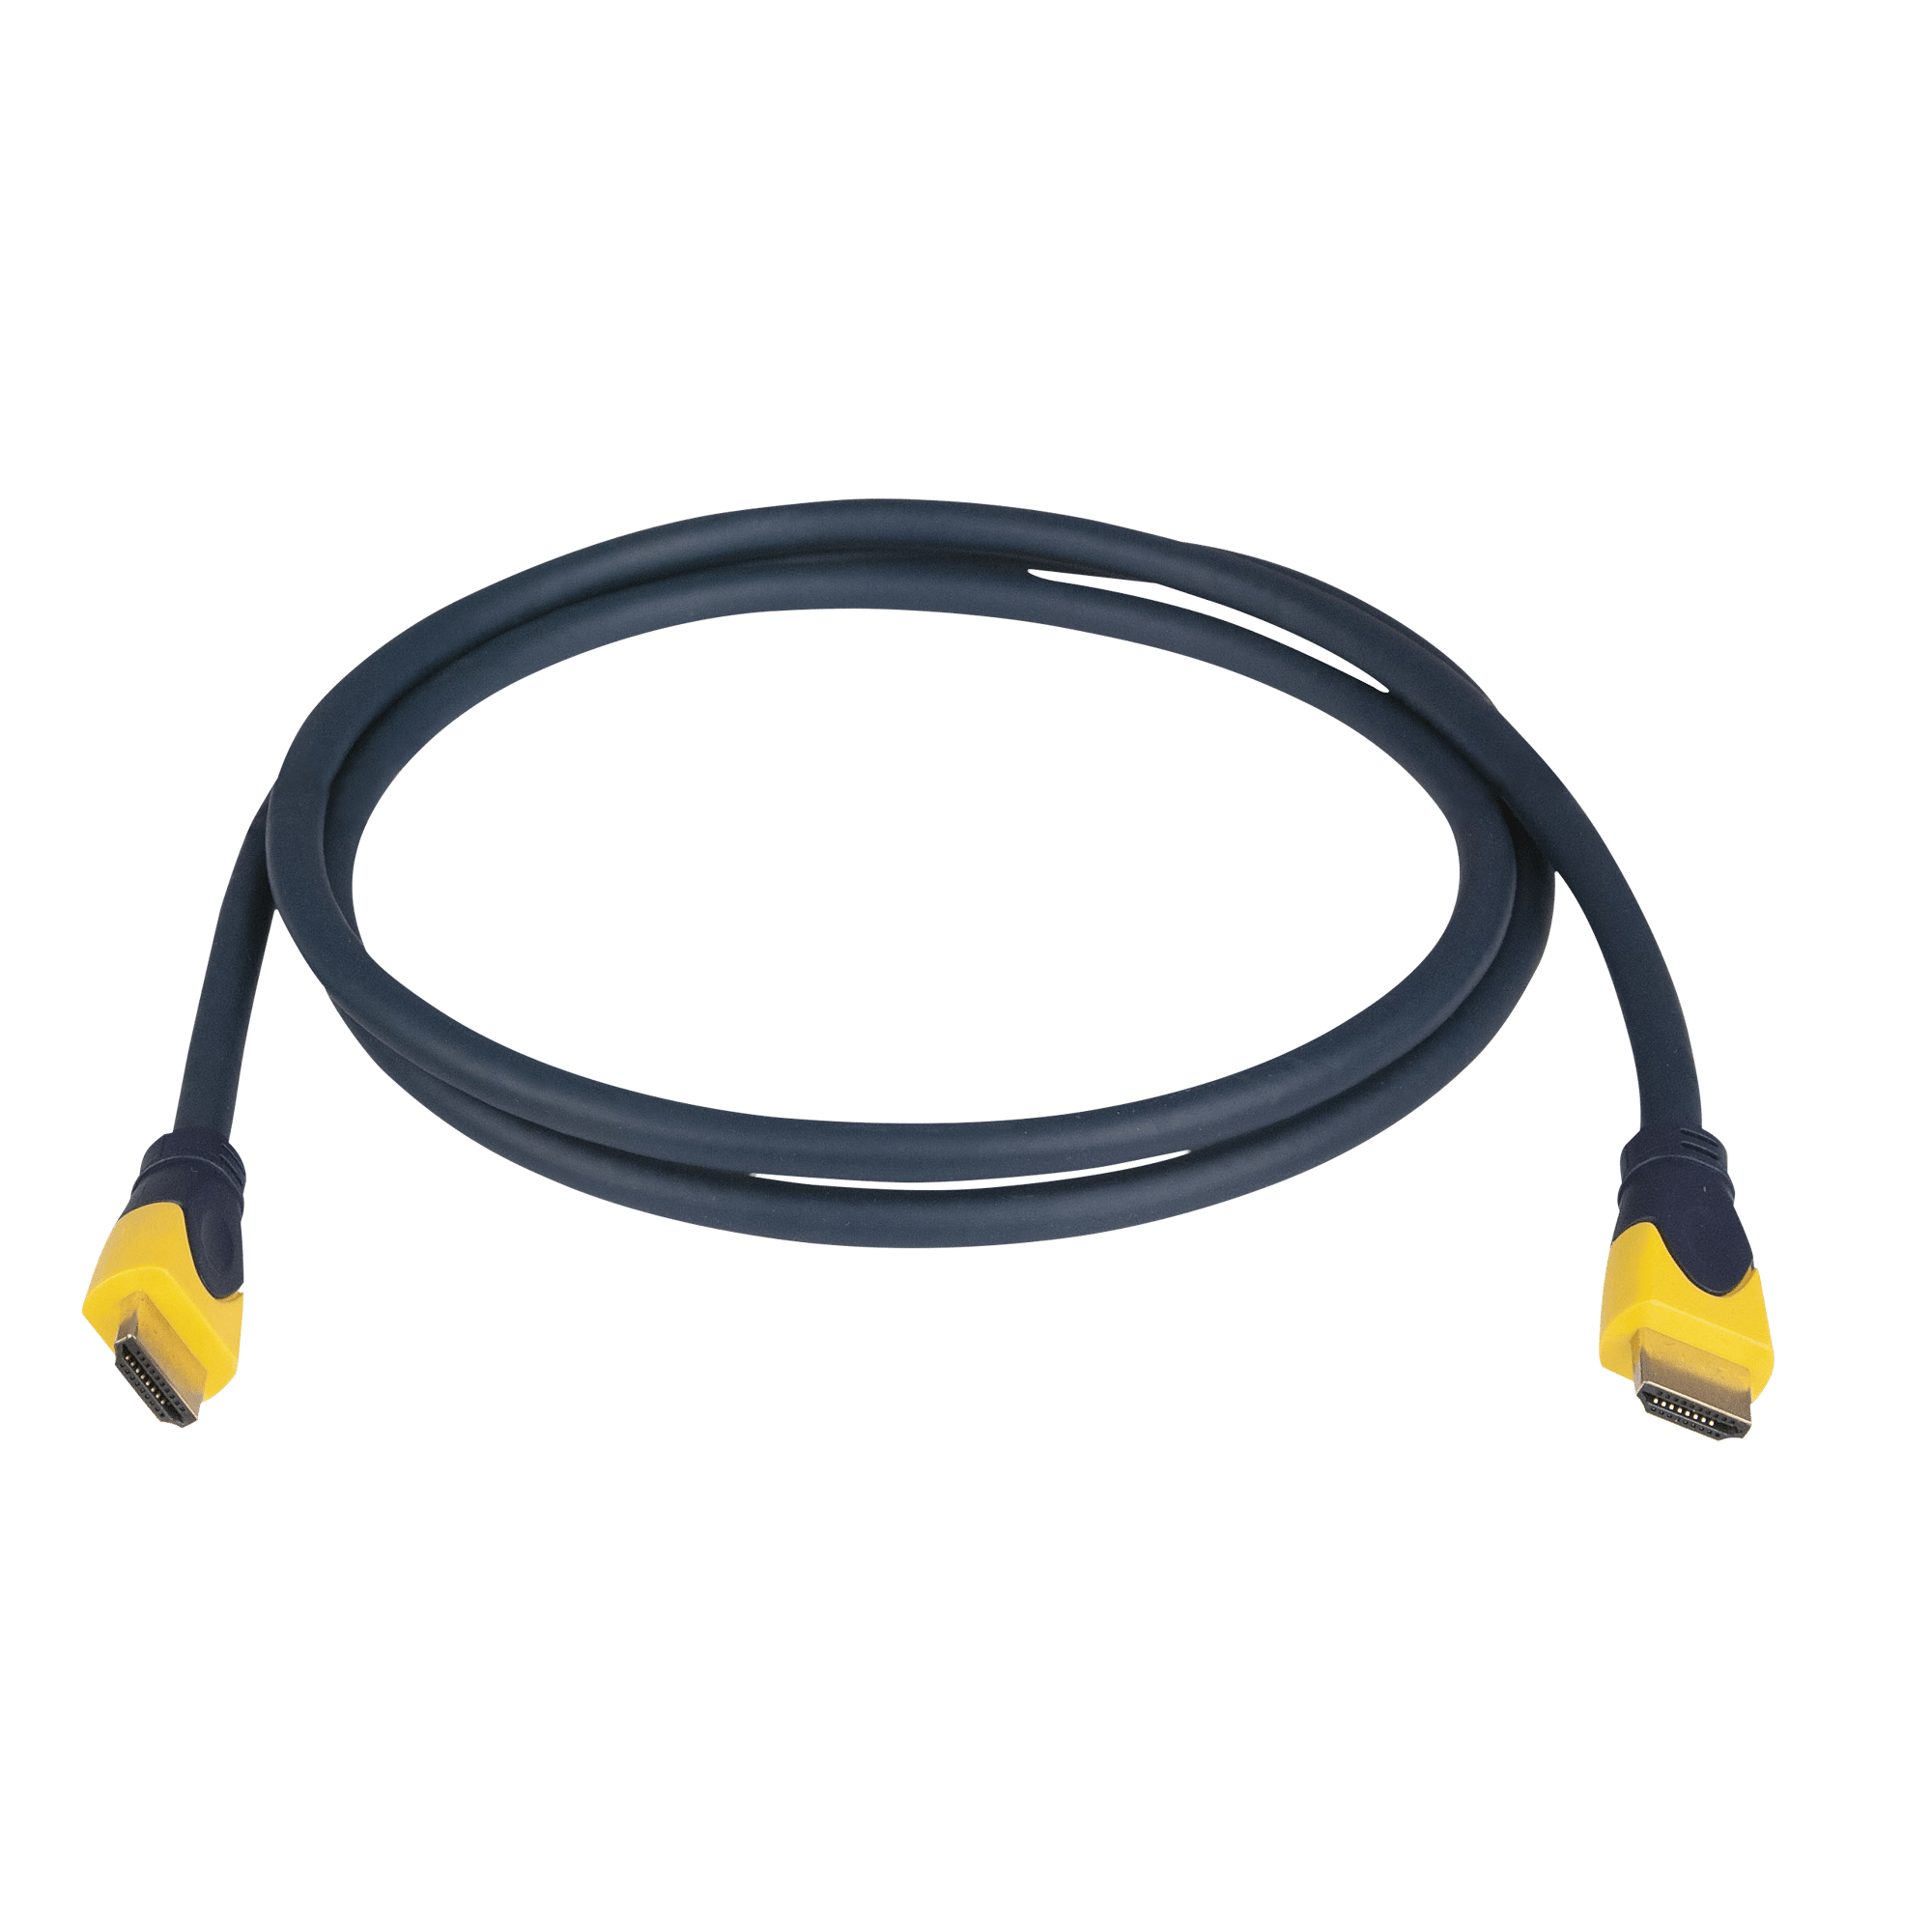 FV41 HDMI 2.0 Cable - Onlinediscowinkel.nl